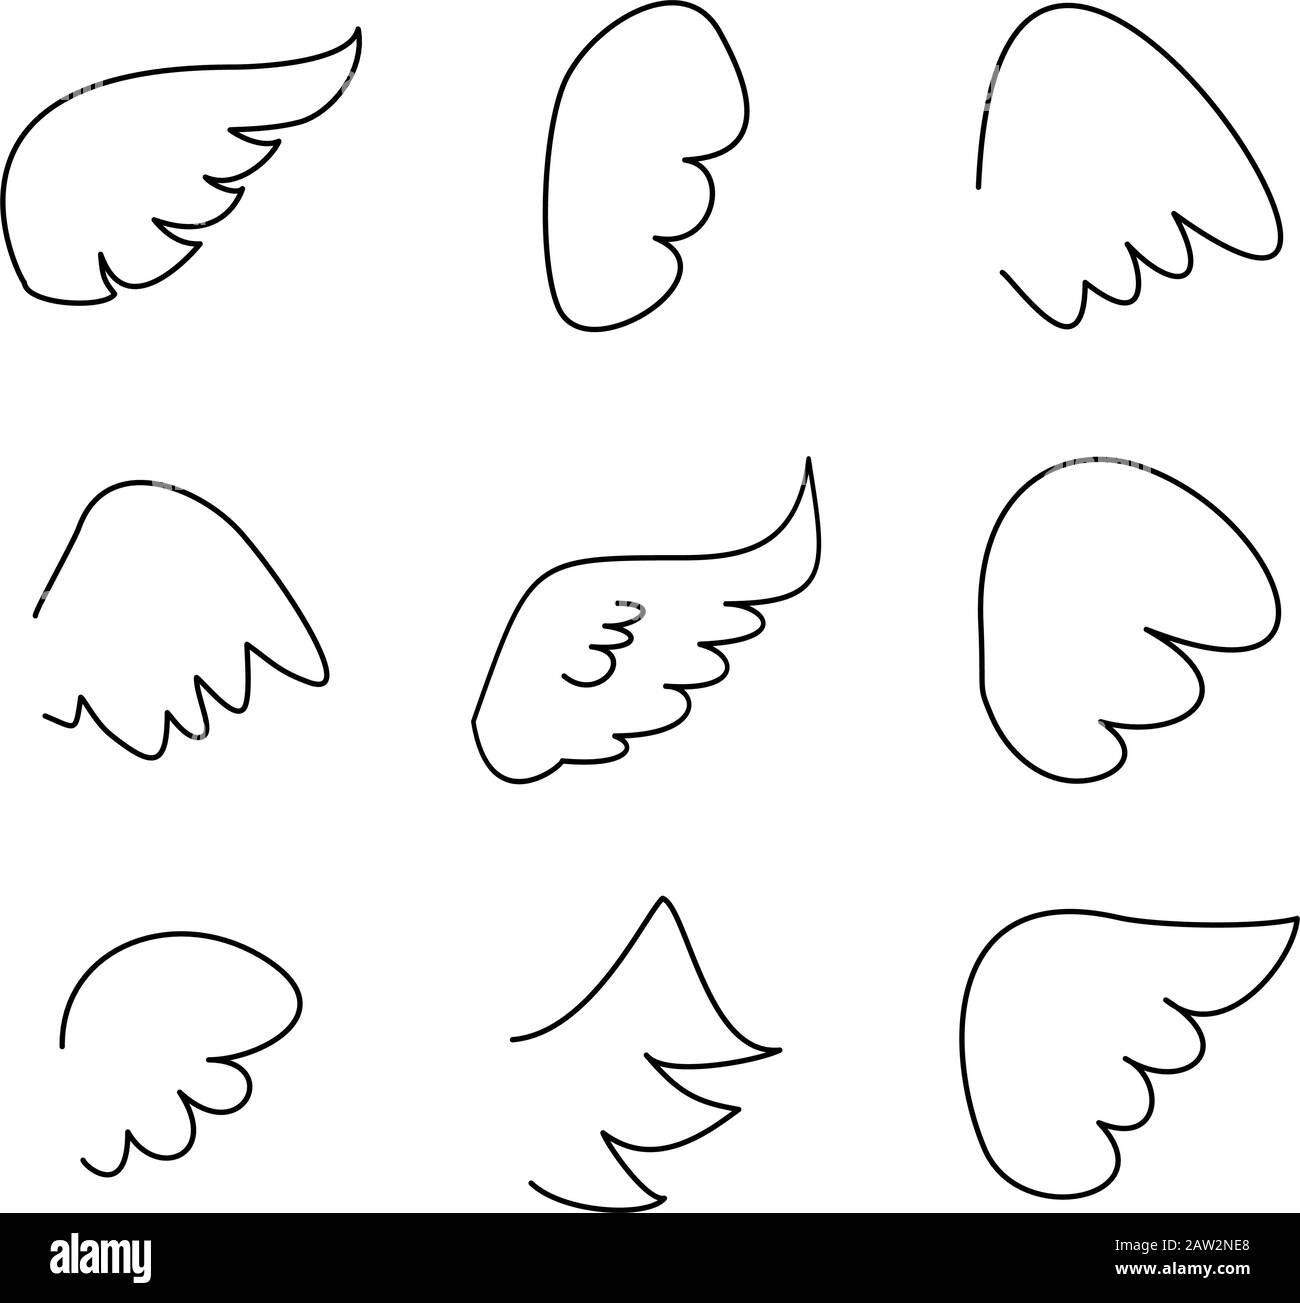 Wings collection. Vector illustration set with angel or bird wing icon isolated on white background Stock Vector